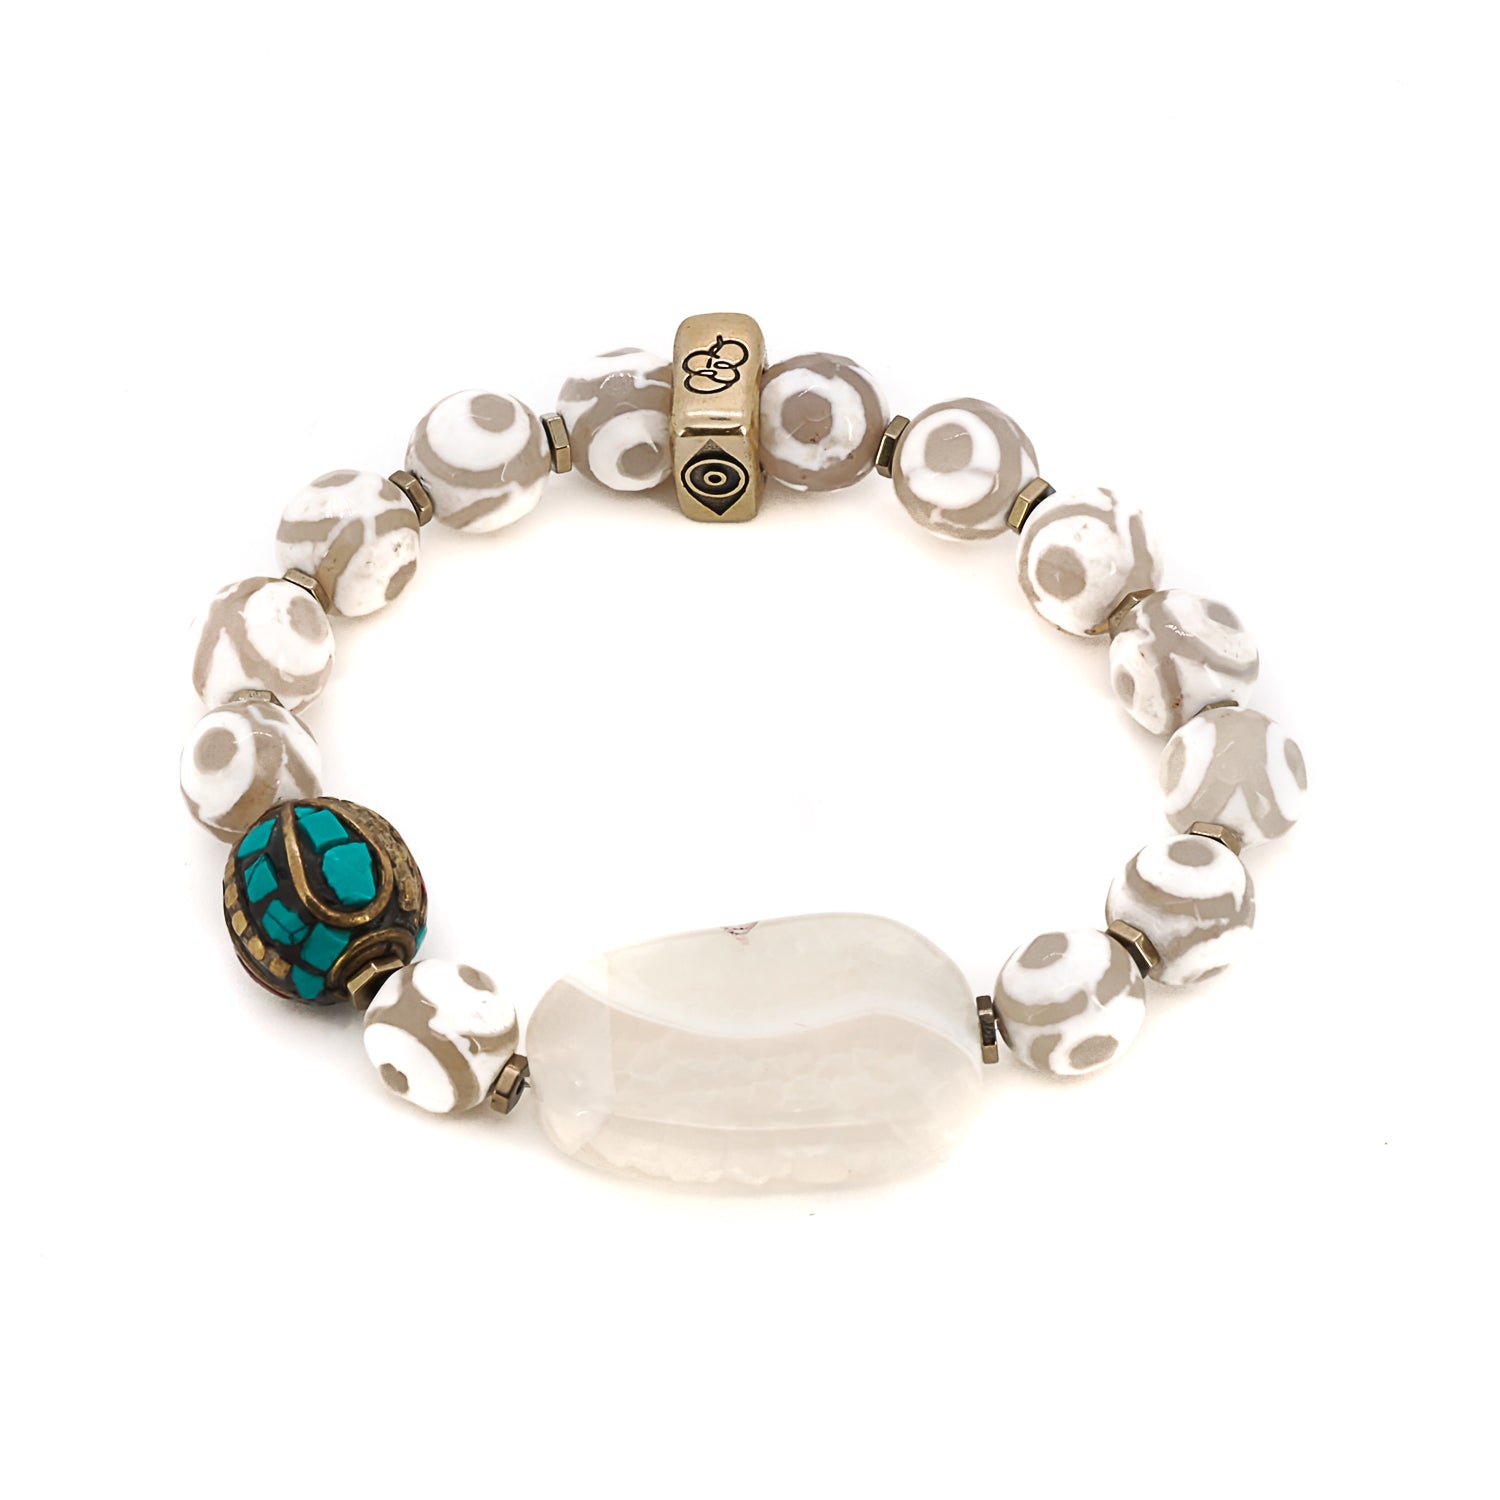 Eye of Nepal Bracelet - Handmade jewelry featuring white Nepal agate and green agate beads, adorned with powerful bronze symbol beads."